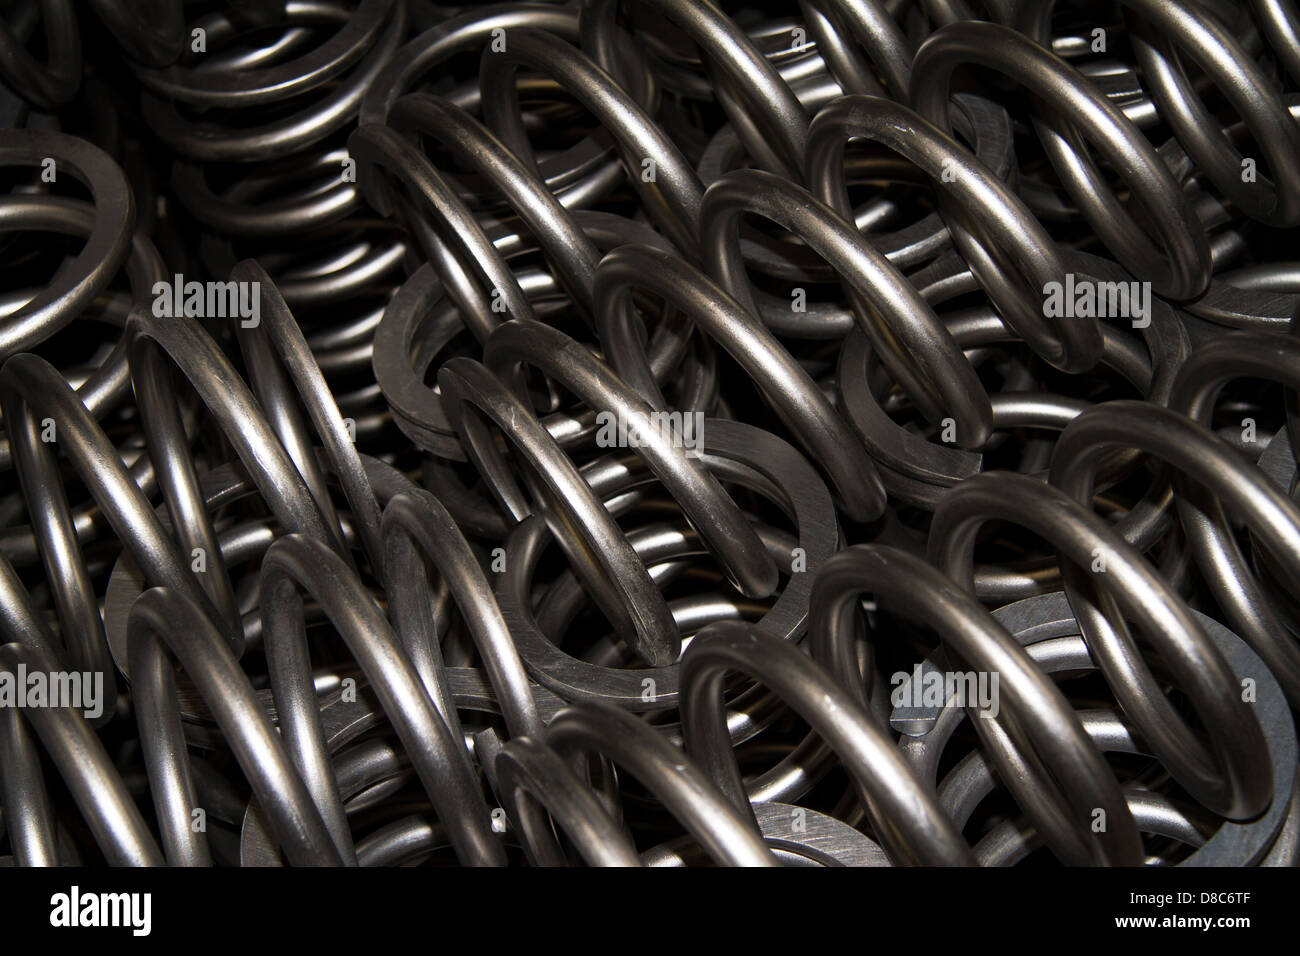 Steel Coil springs Stock Photo